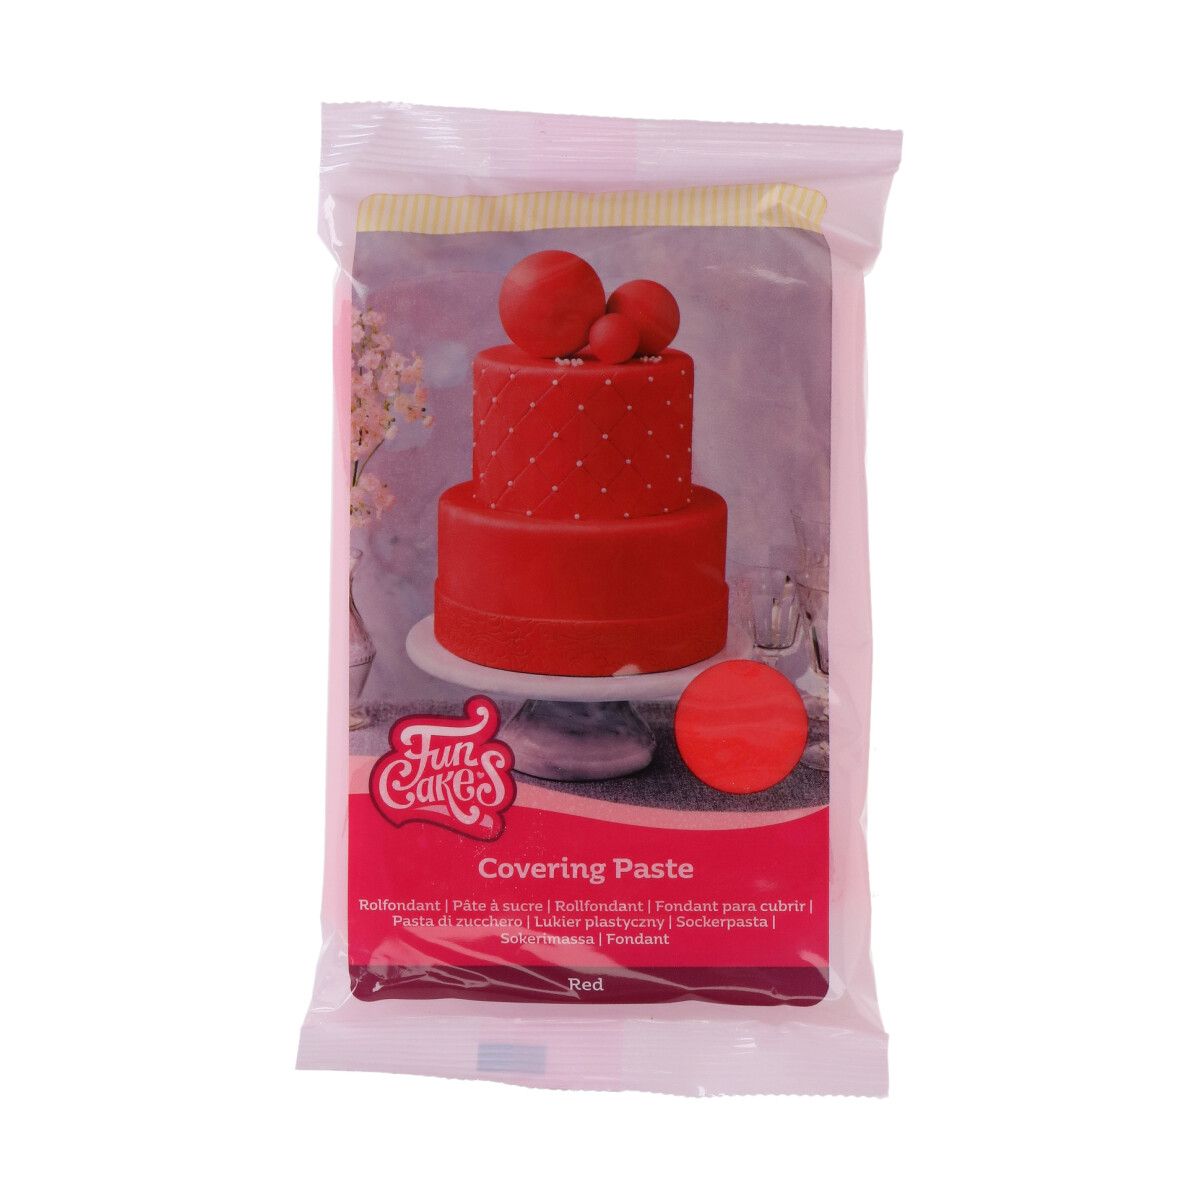 FUNCAKES COVERING PASTE 500G red